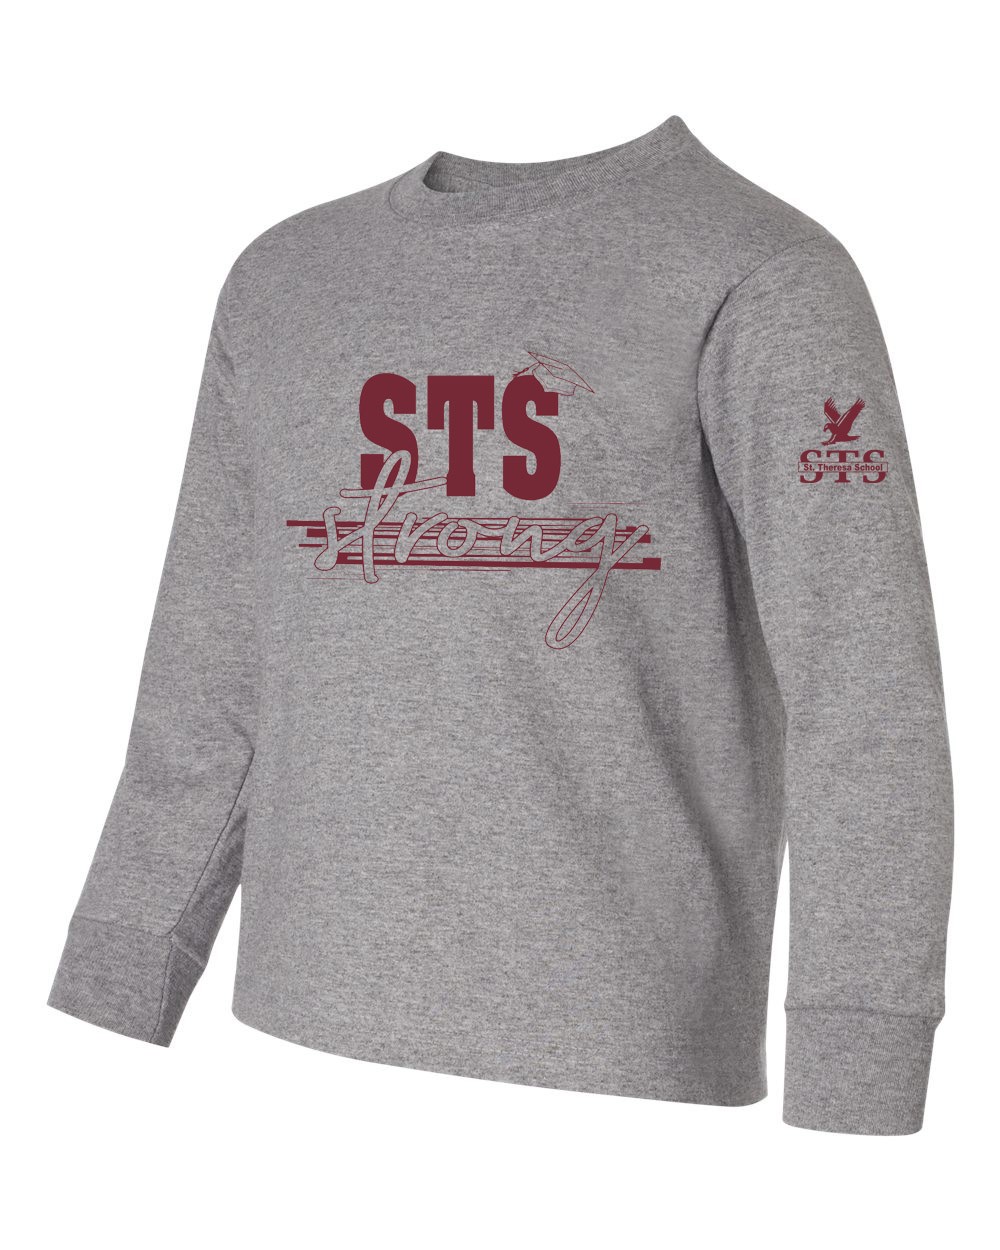 STS Staff L/S Strong Spirit T-Shirt w/ Maroon Logo - Please Allow 2-3 Weeks for Delivery